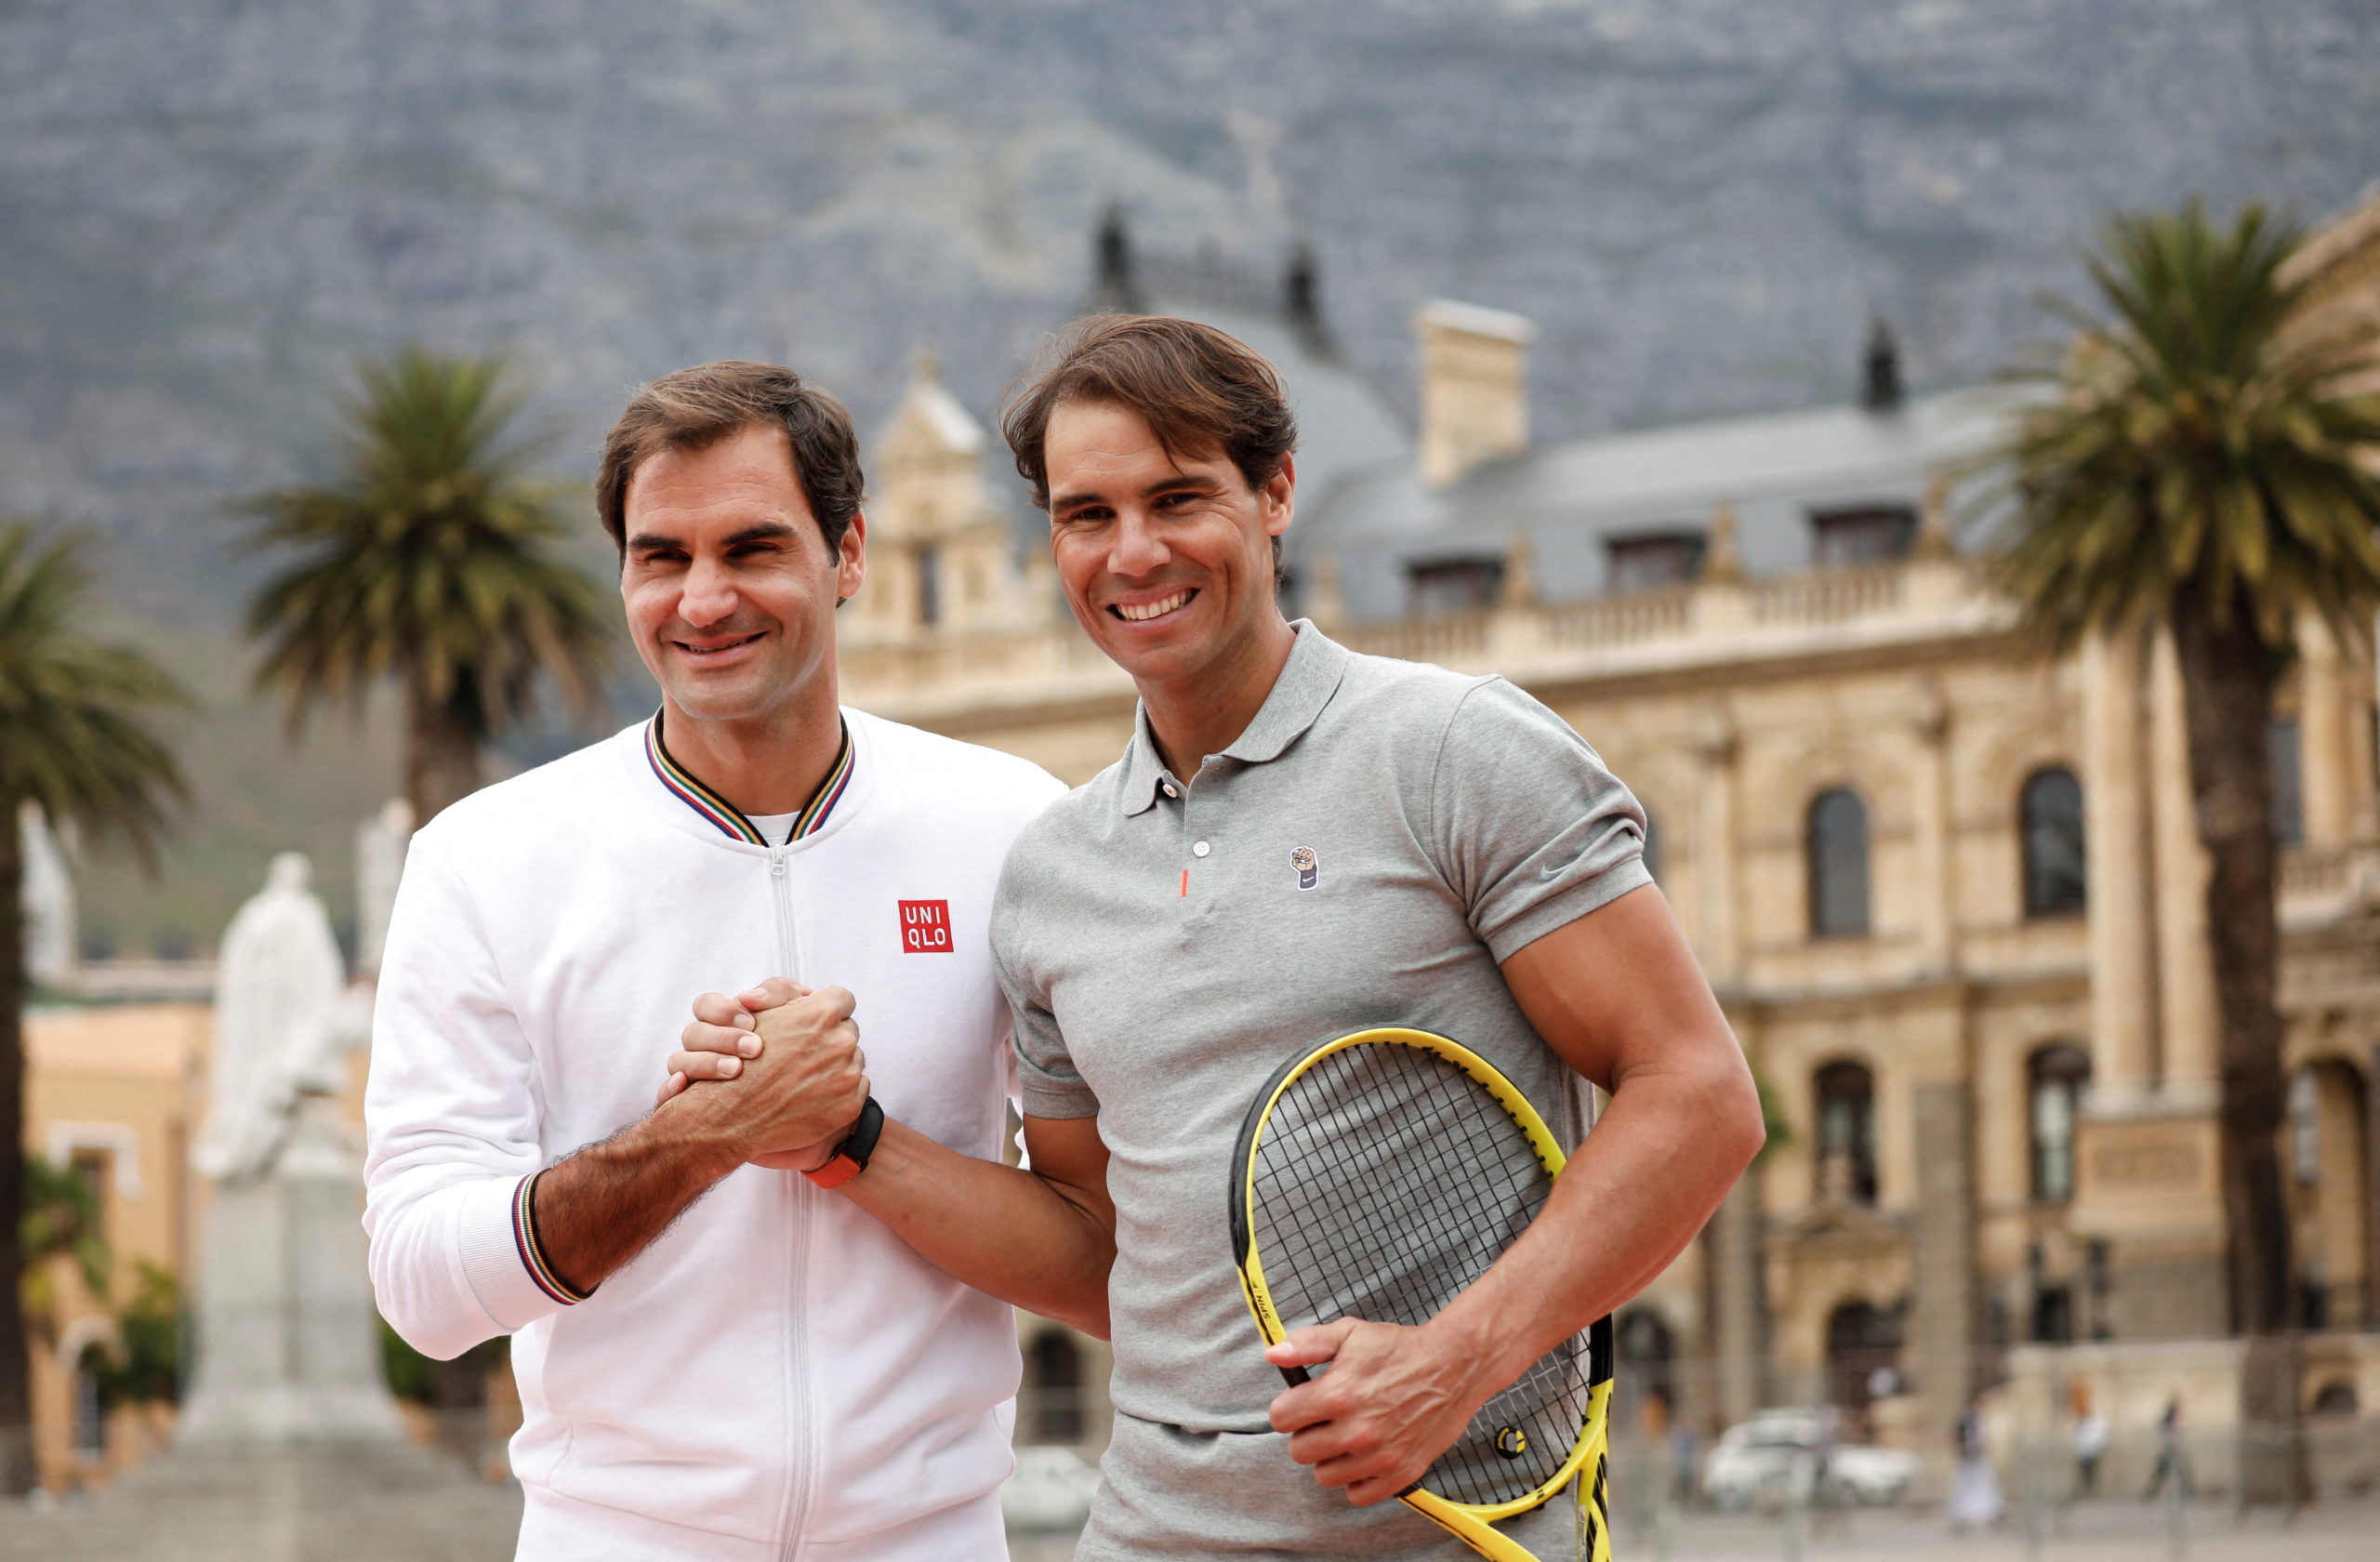 FILE PHOTO: Roger Federer and Rafael Nadal pose for photographers ahead of their "Match in Africa" exhibition tennis match in Cape Town, South Africa, February 7, 2020.